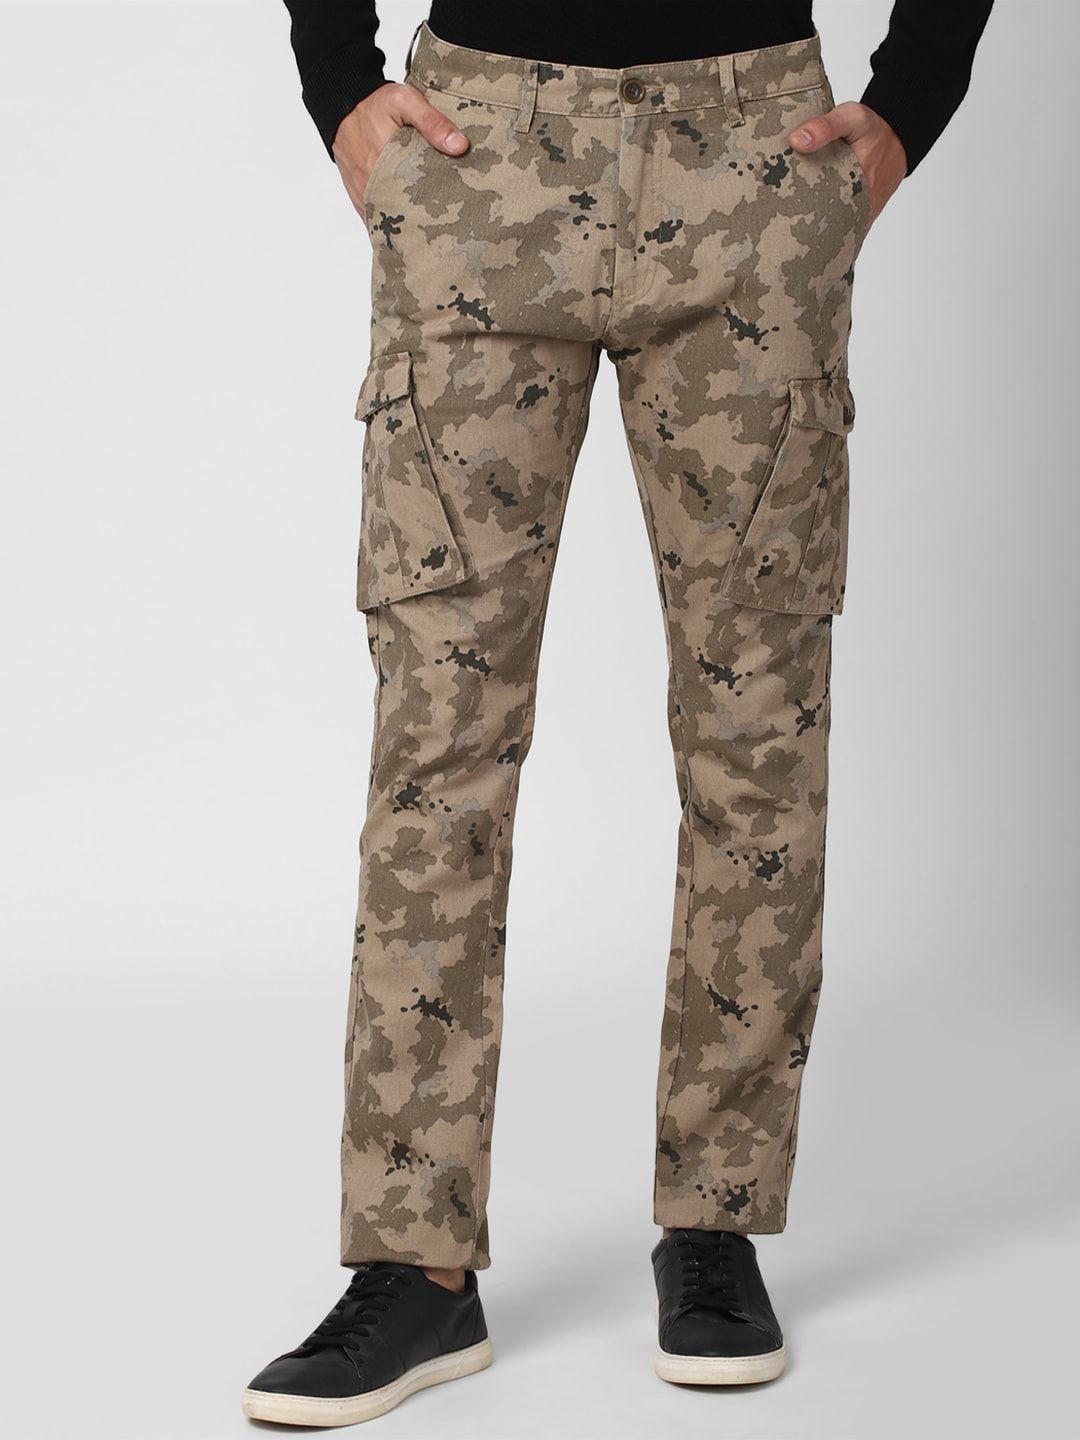 peter england casuals men brown regular fit camouflage printed cargos trousers